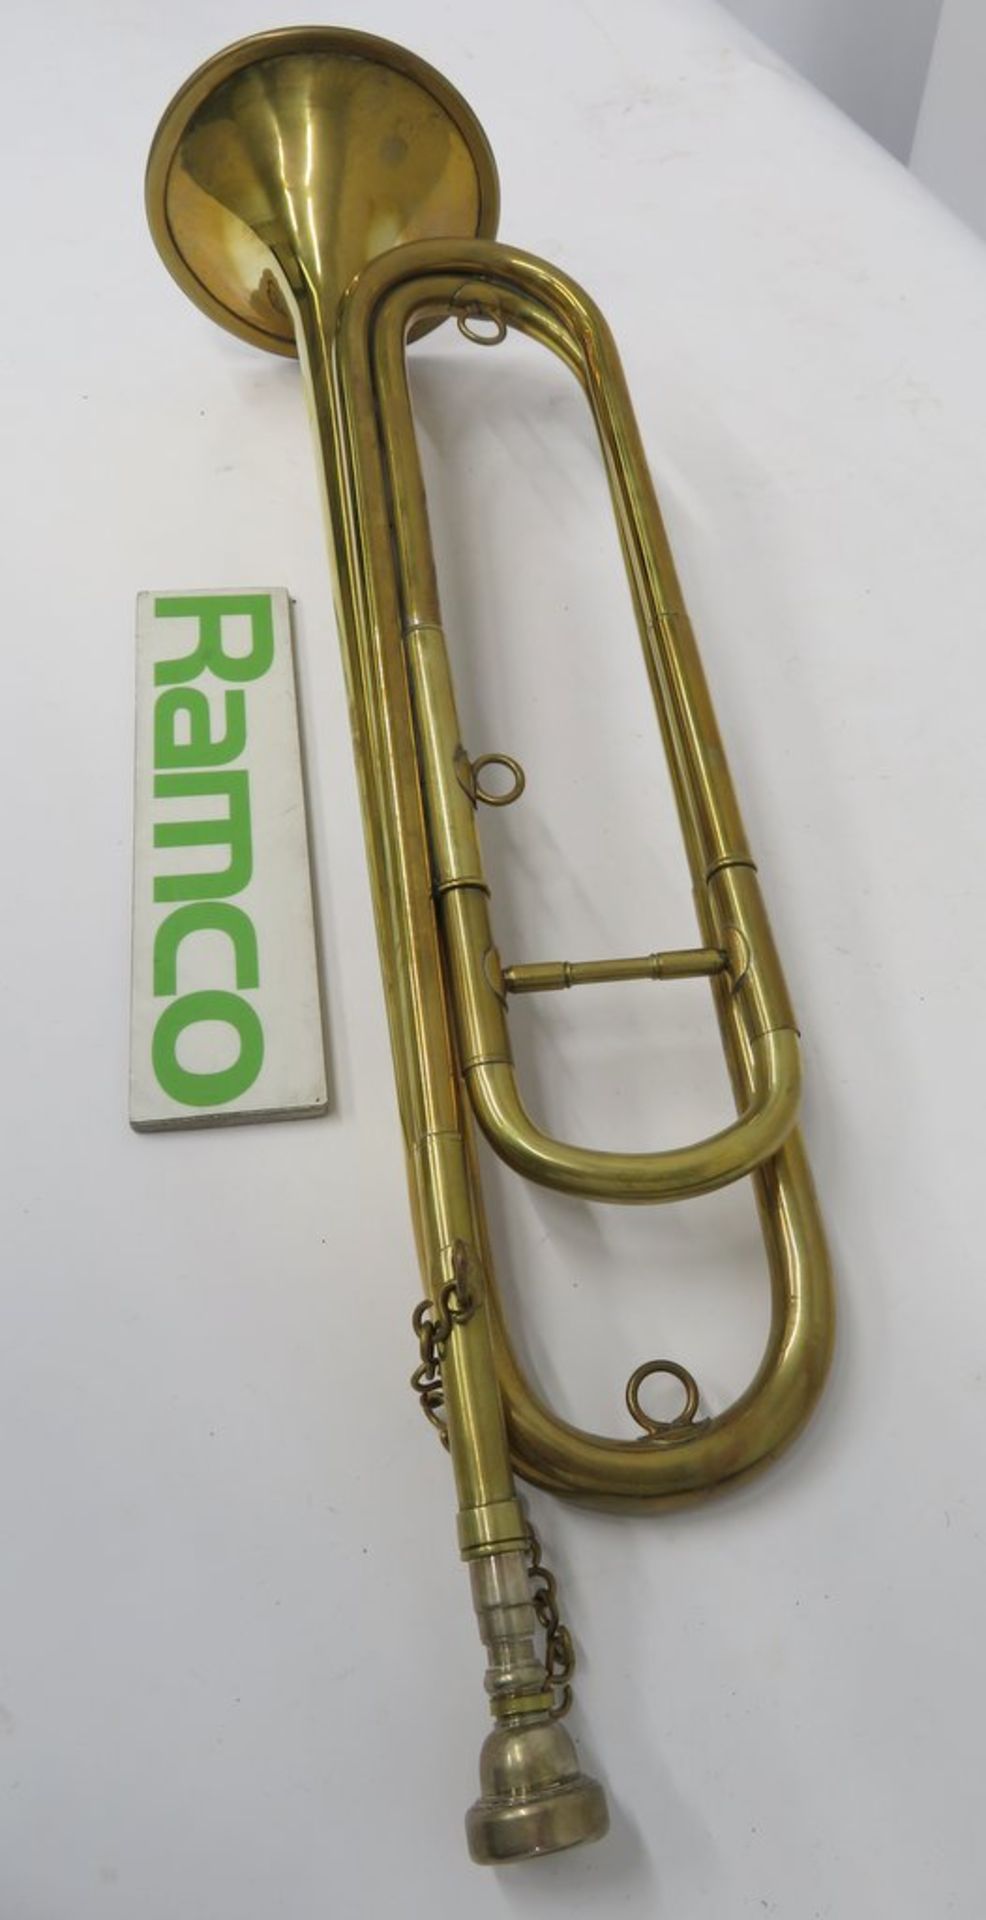 Unbranded Cavalry Trumpet. Please Note This Item Has Not Been Tested And Will Be Sold As S - Image 7 of 8